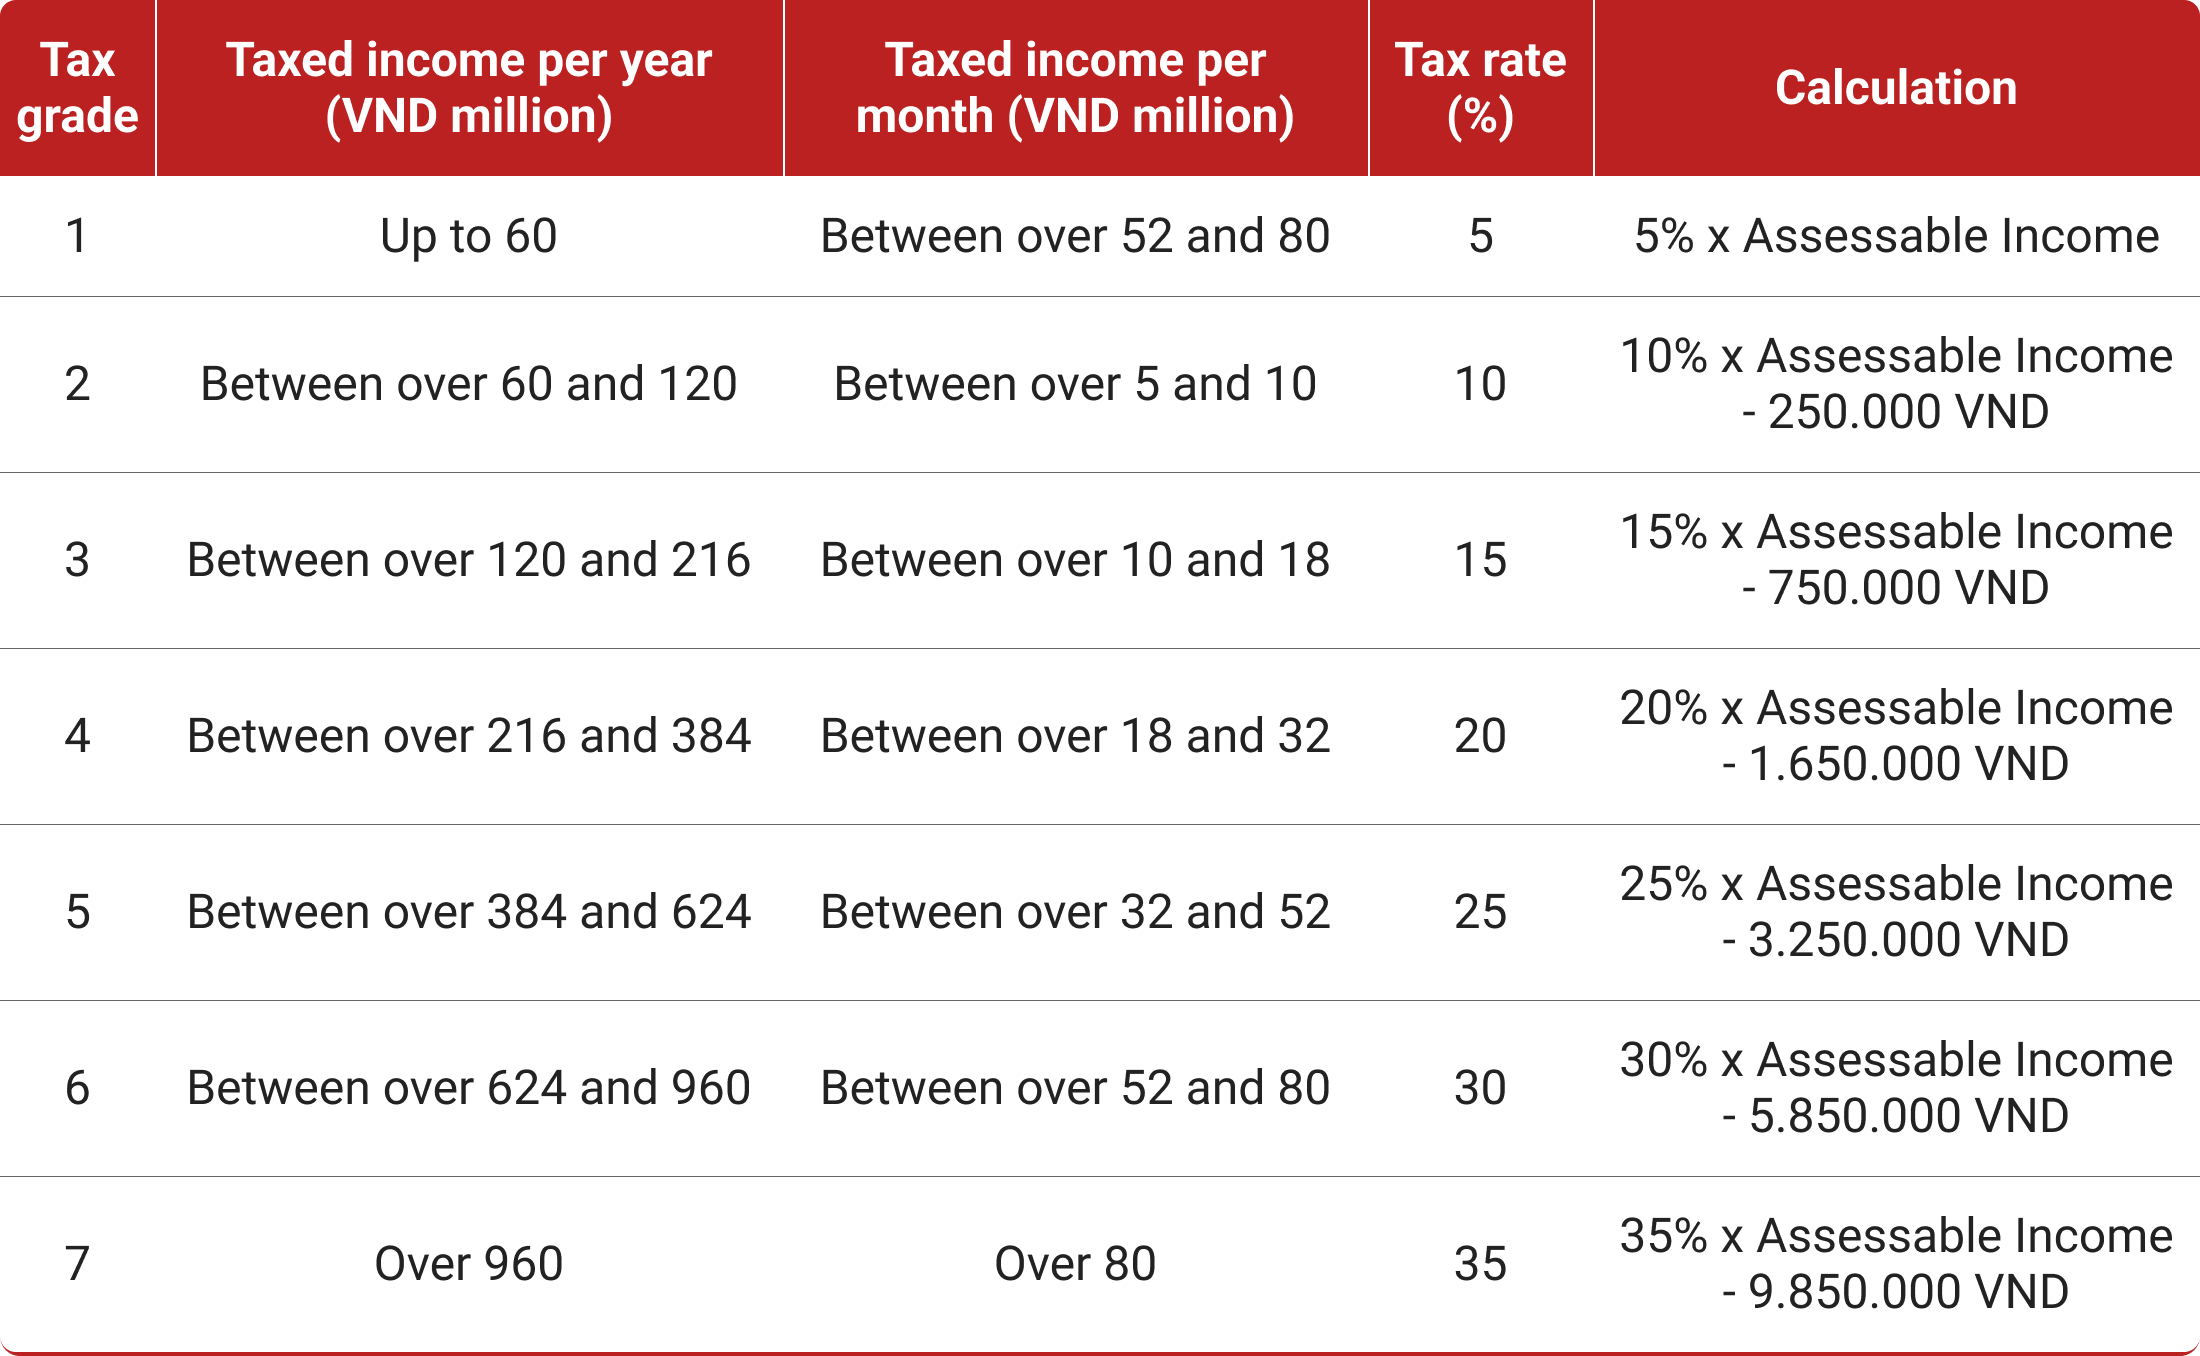 Personal Income Tax (PIT) Rate in Vietnam
